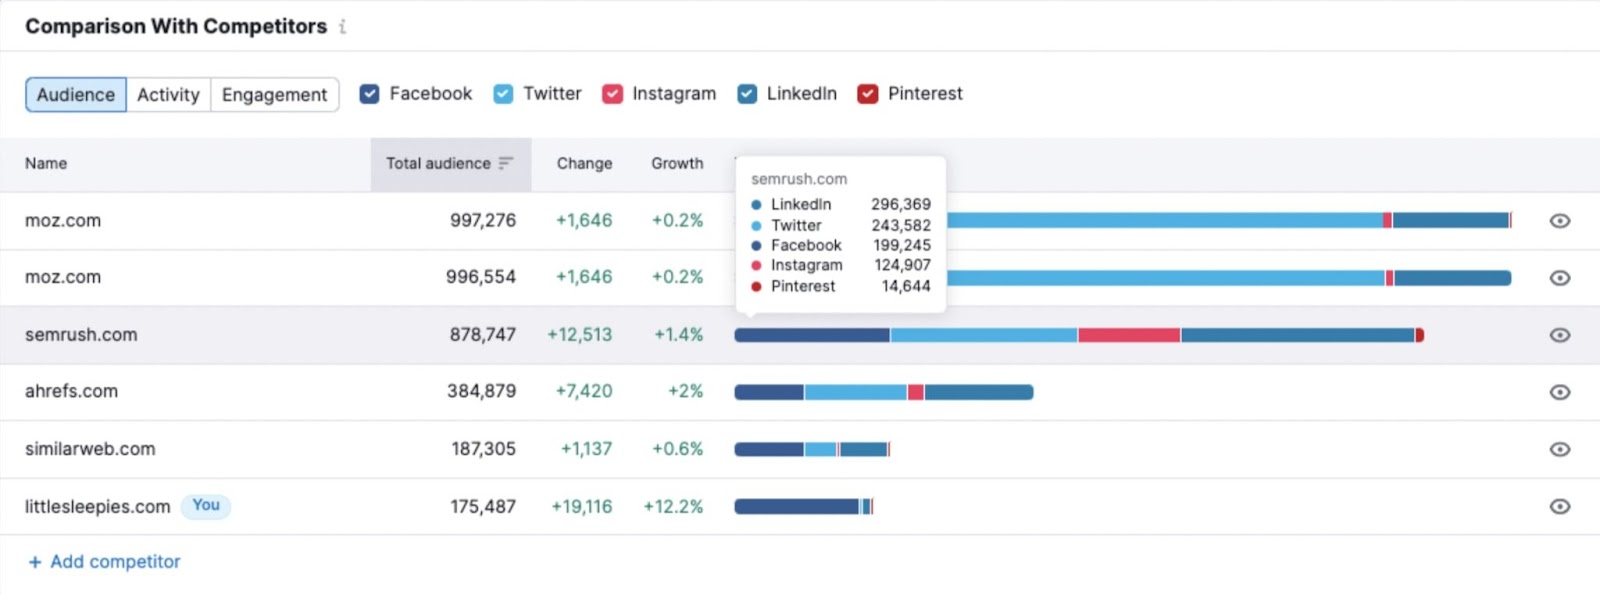 "Comparison with Competitors" charts shown in Social Tracker tool